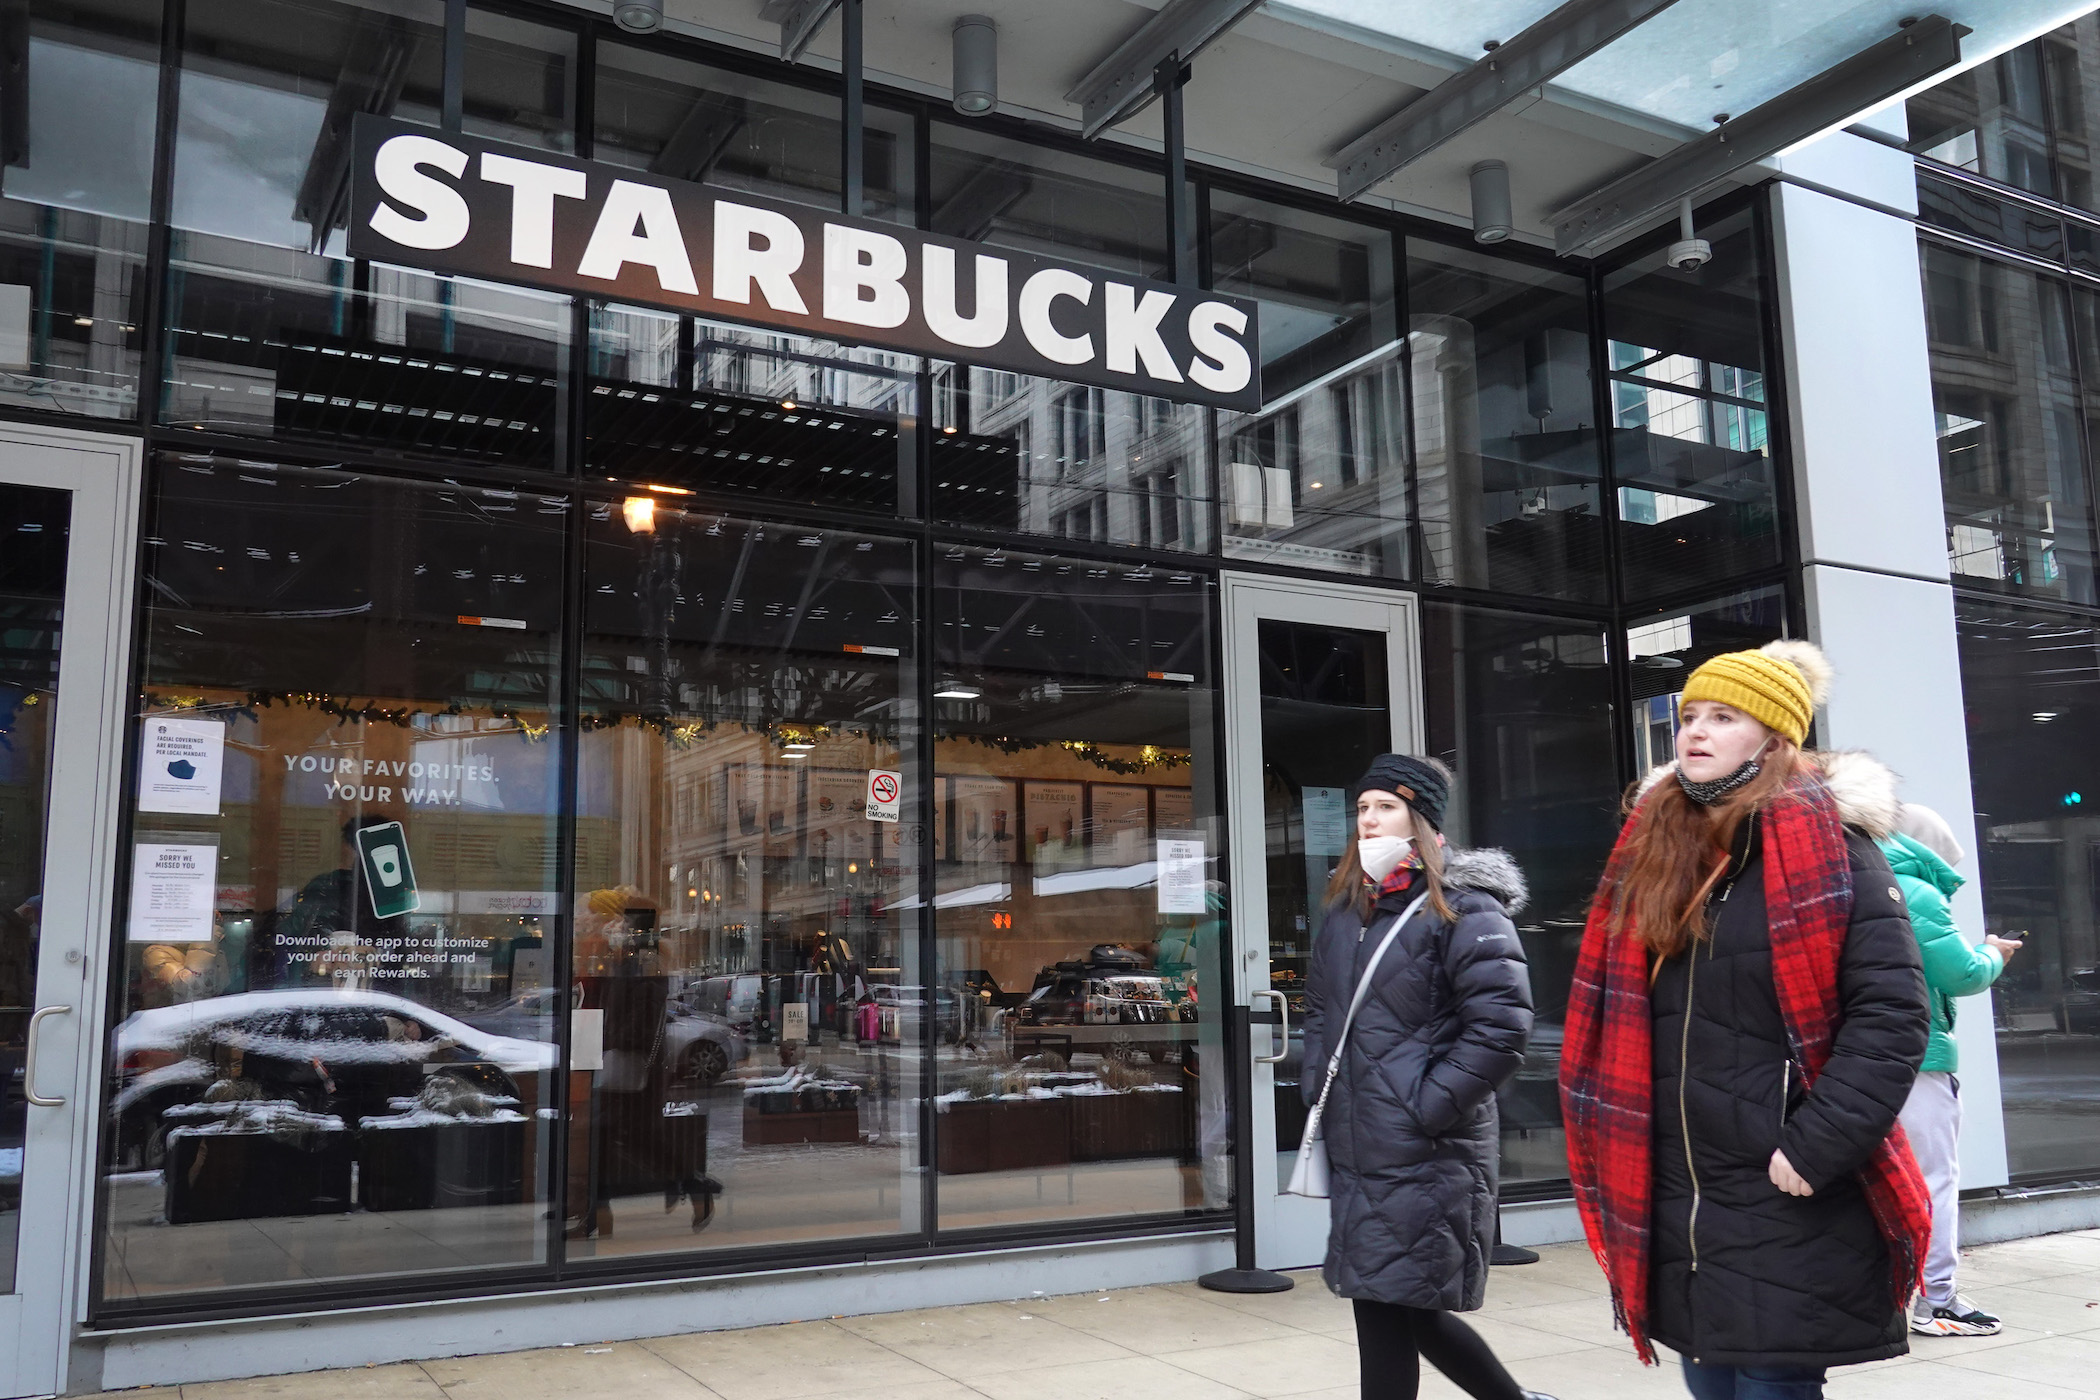 A Starbucks sign hangs above the entrance of one of the chain's coffee shops in the Loop on January 04, 2022 in Chicago, Illinois. Workers at the coffee shop have submitted signed cards seeking to join an affiliate of the Service Employees International Union (SEIU), making it the first Starbucks in the Midwest to request a union certification.